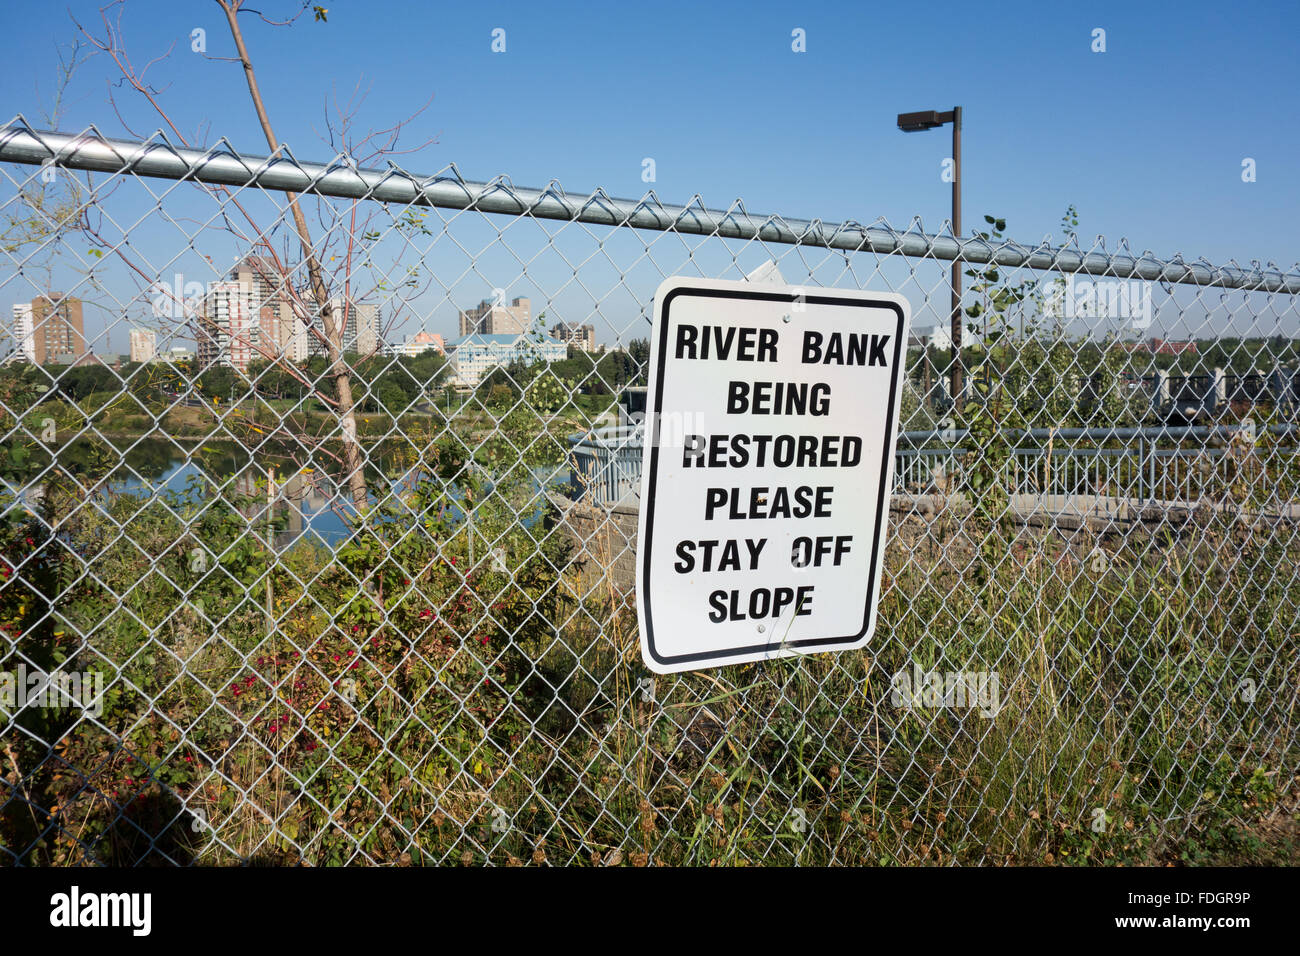 Sign for the river bank being restored Sasktoon Canada Stock Photo